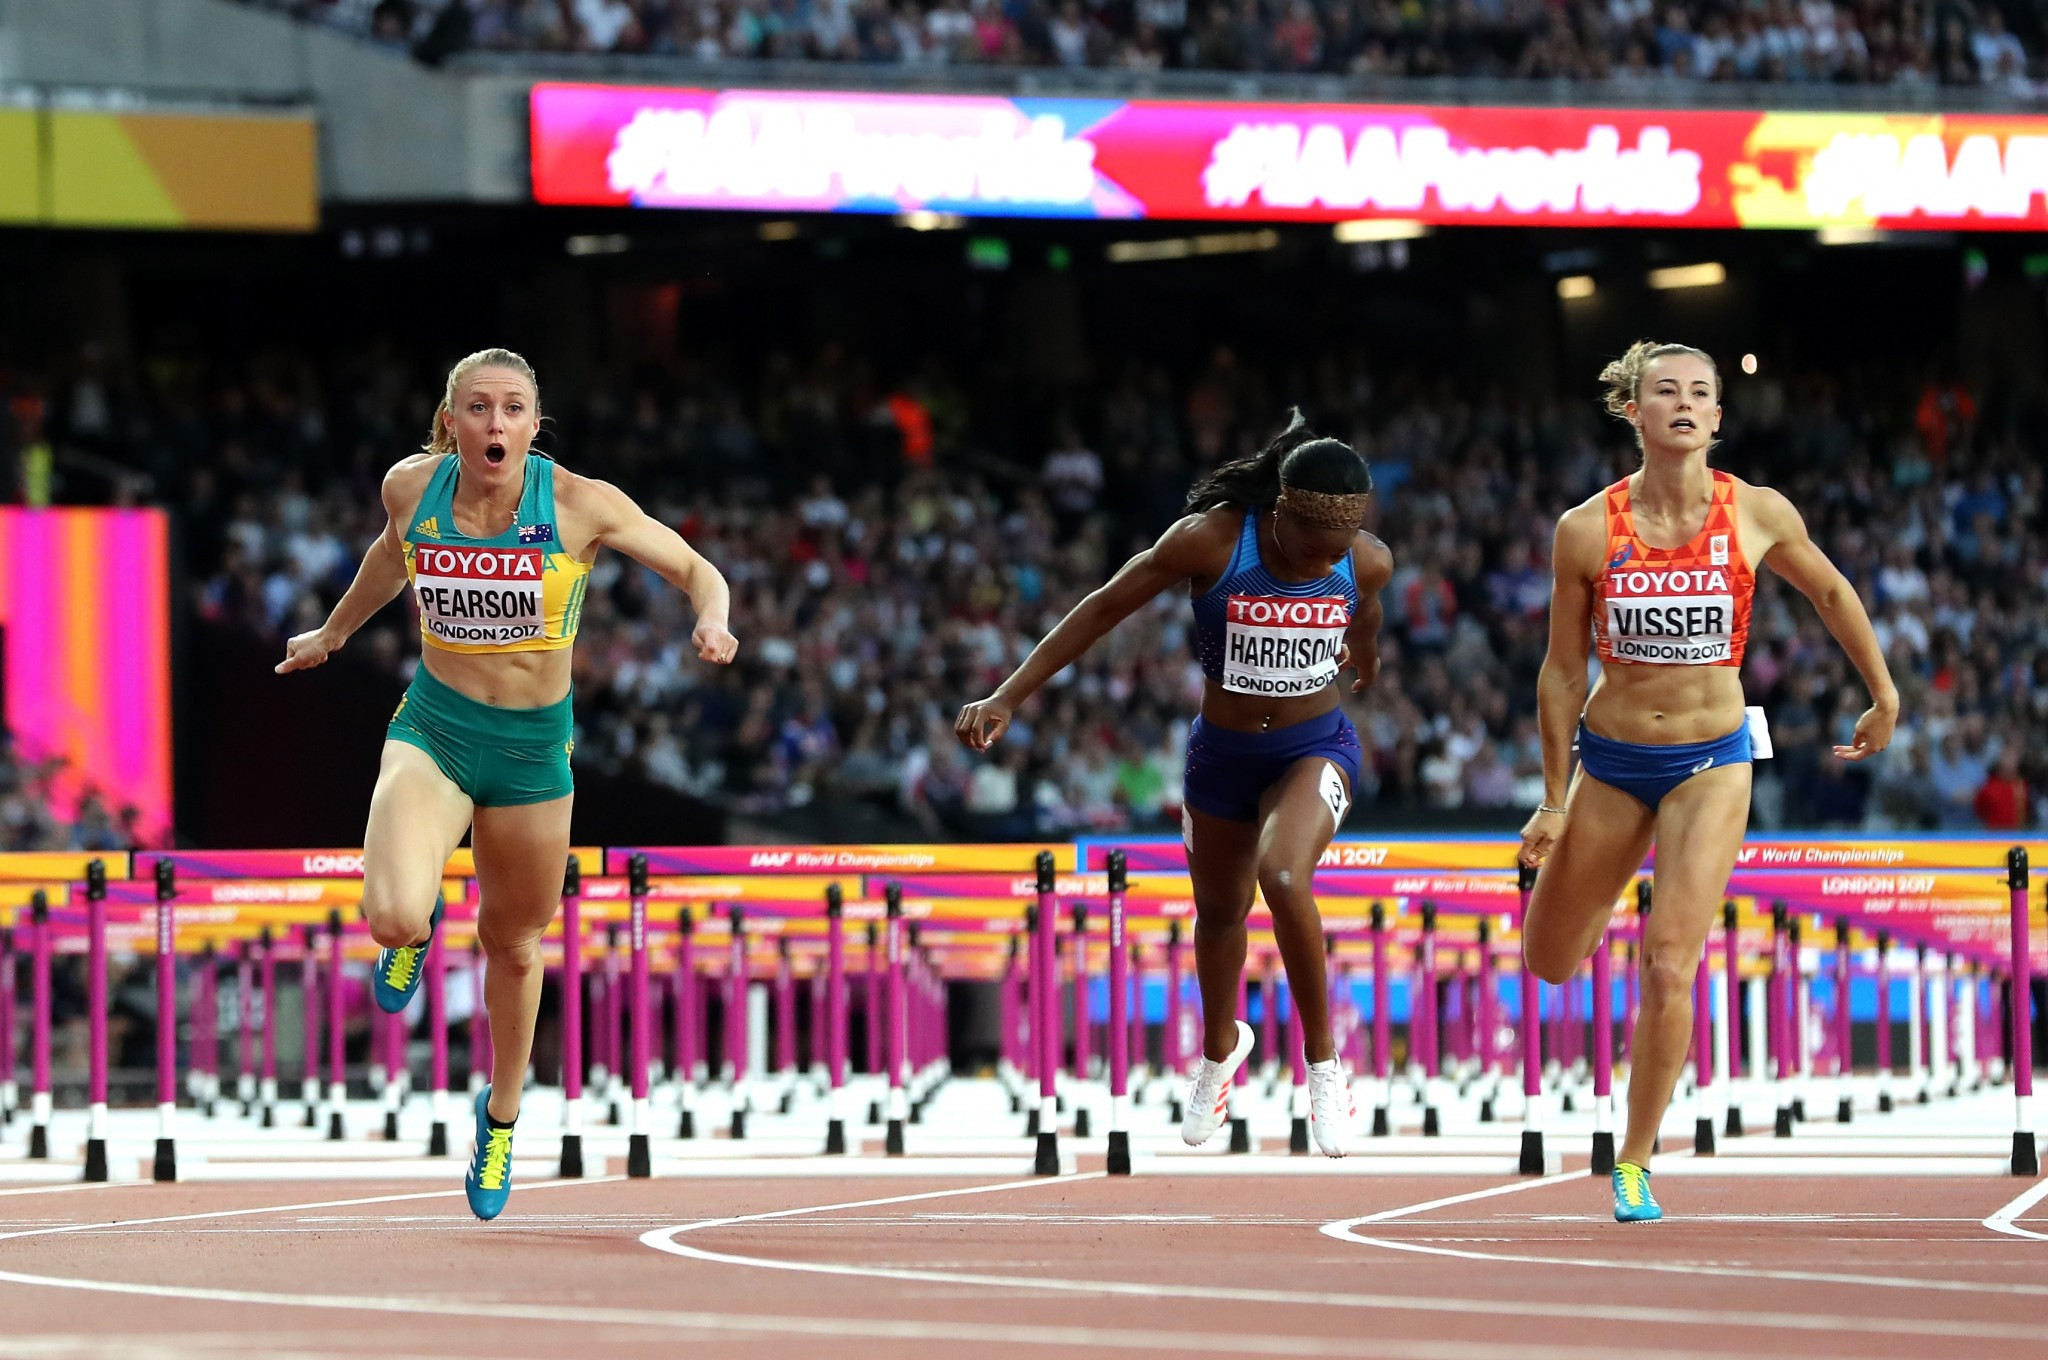 Sally Pearson completed a remarkable comeback with victory in the women's 100m hurdles ©Getty Images